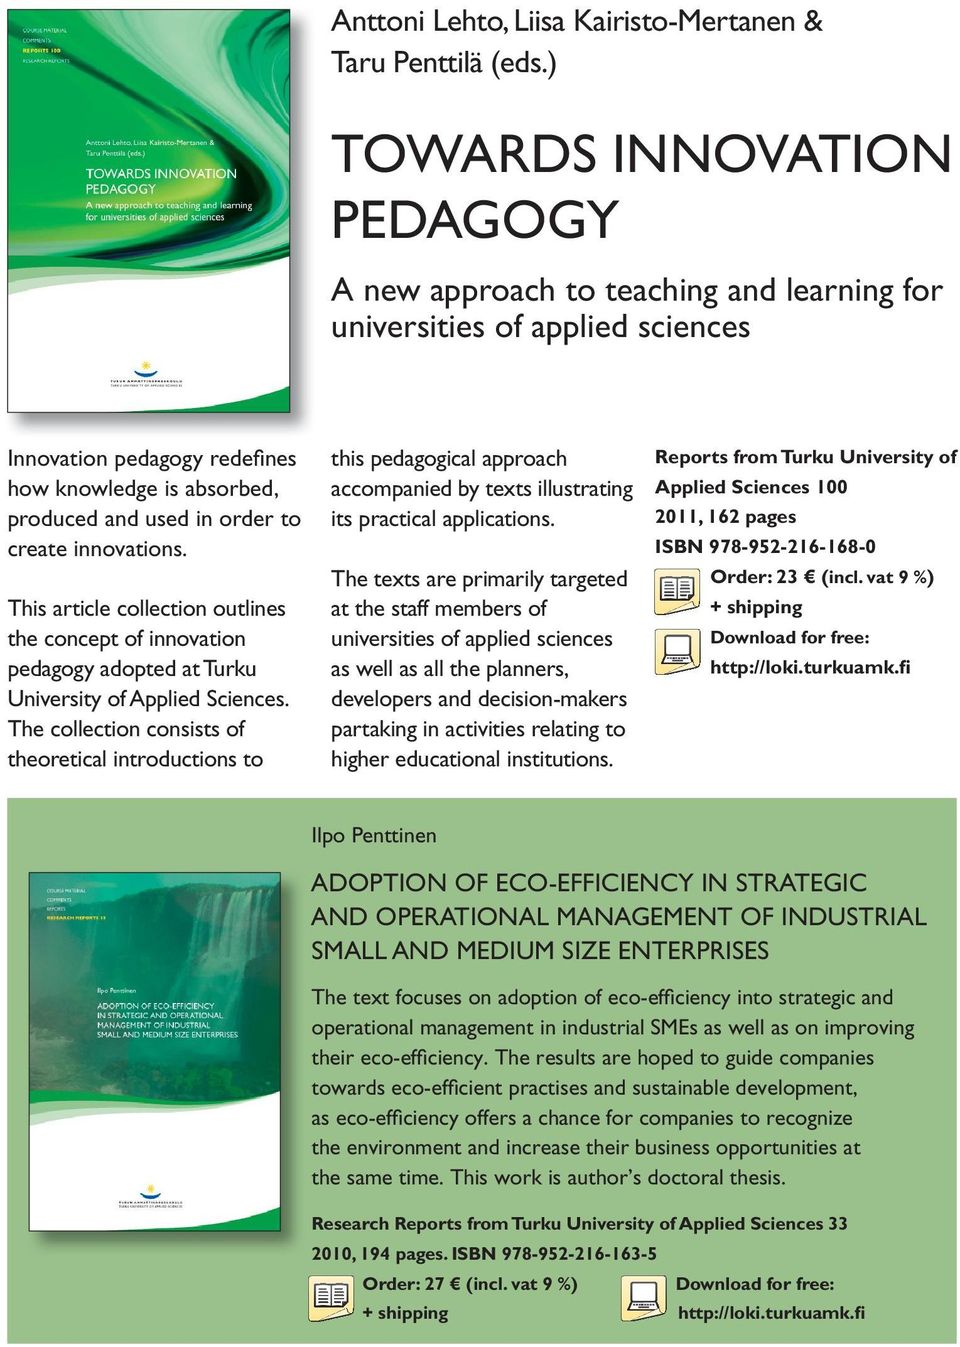 create innovations. This article collection outlines the concept of innovation pedagogy adopted at Turku University of Applied Sciences.